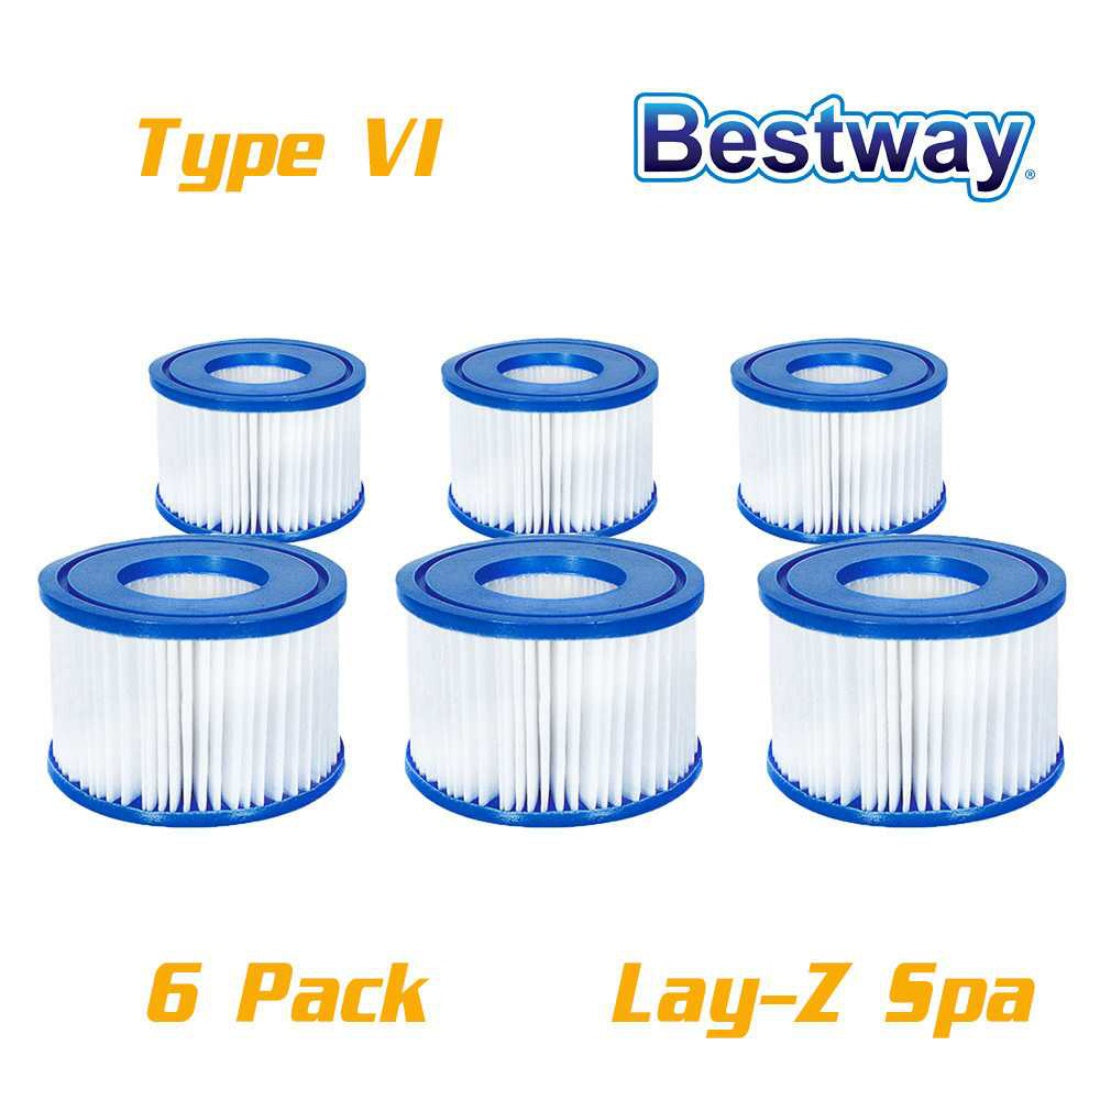 Bestway Lay-Z-Spa Accessories - Replacement Filter Cartridge Type VI 58323